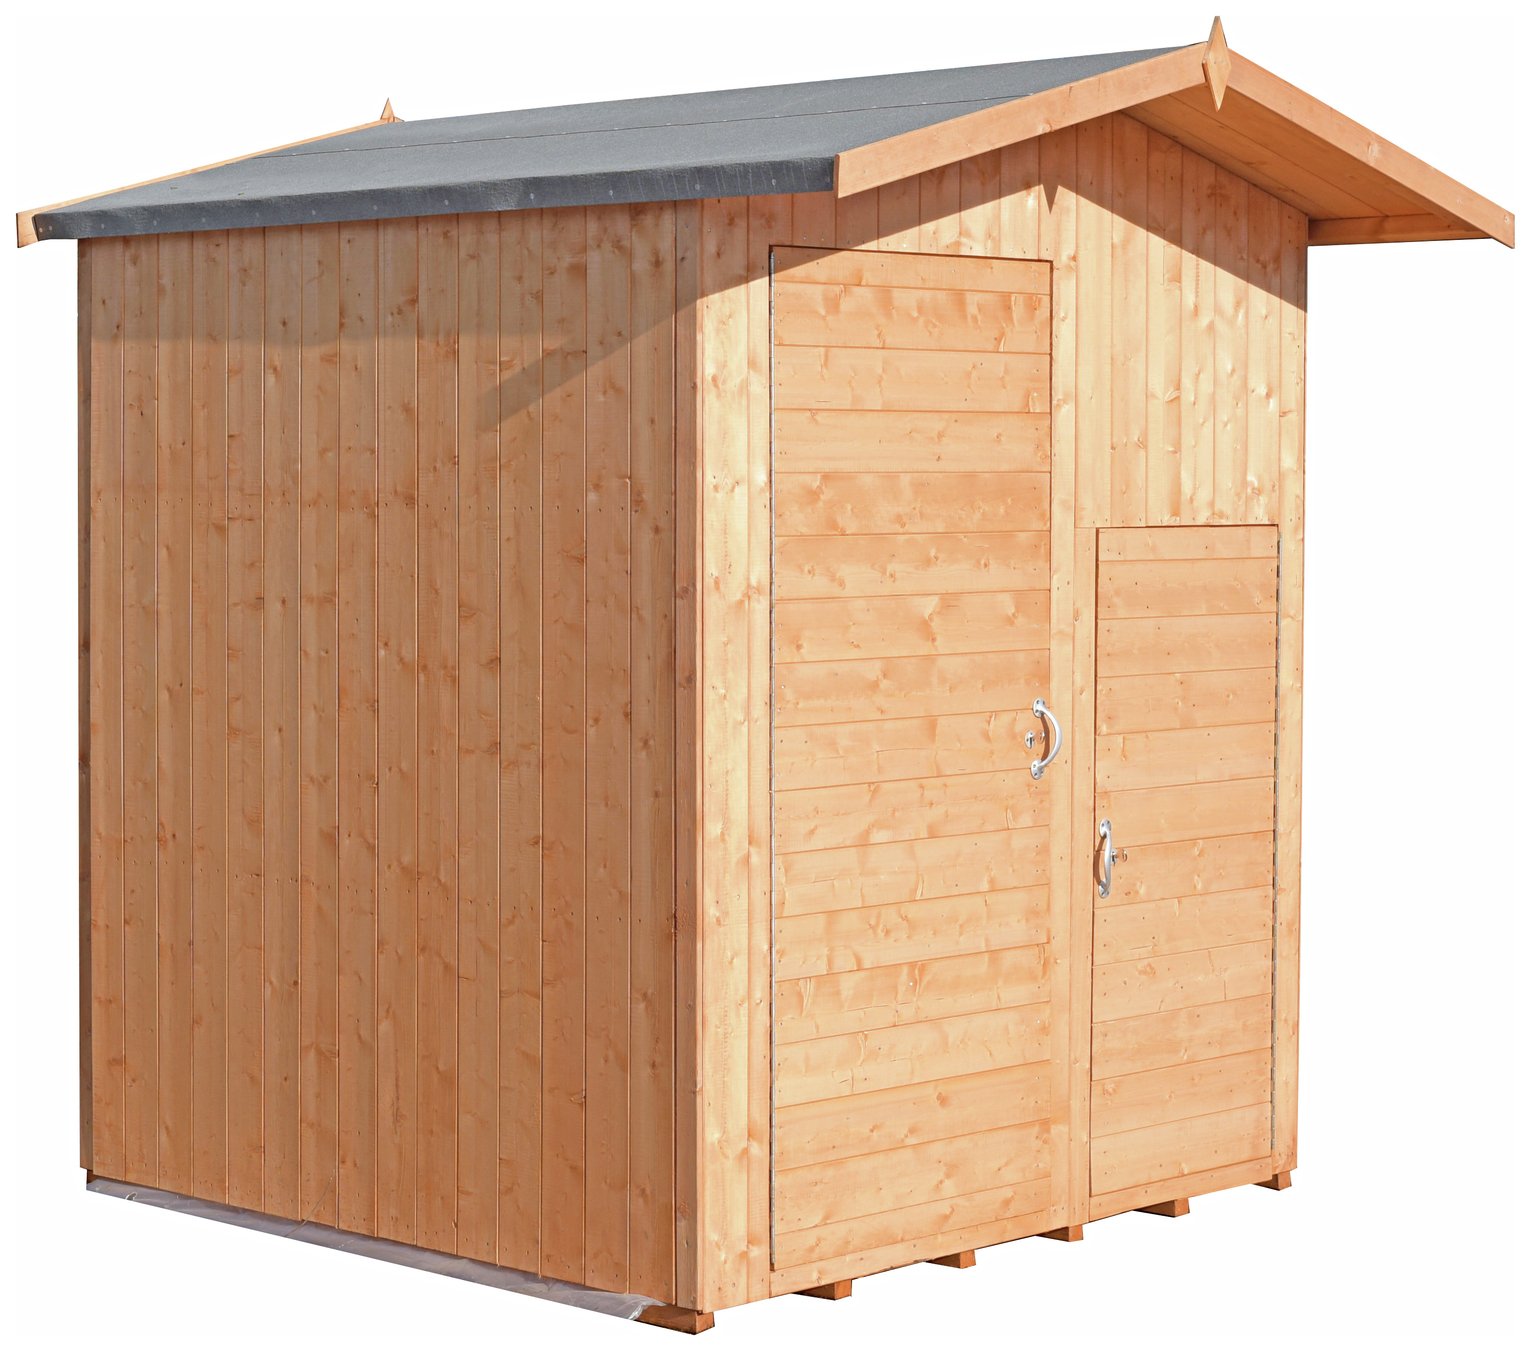 Shire 6x6 Multi Store Garden Storage Shed